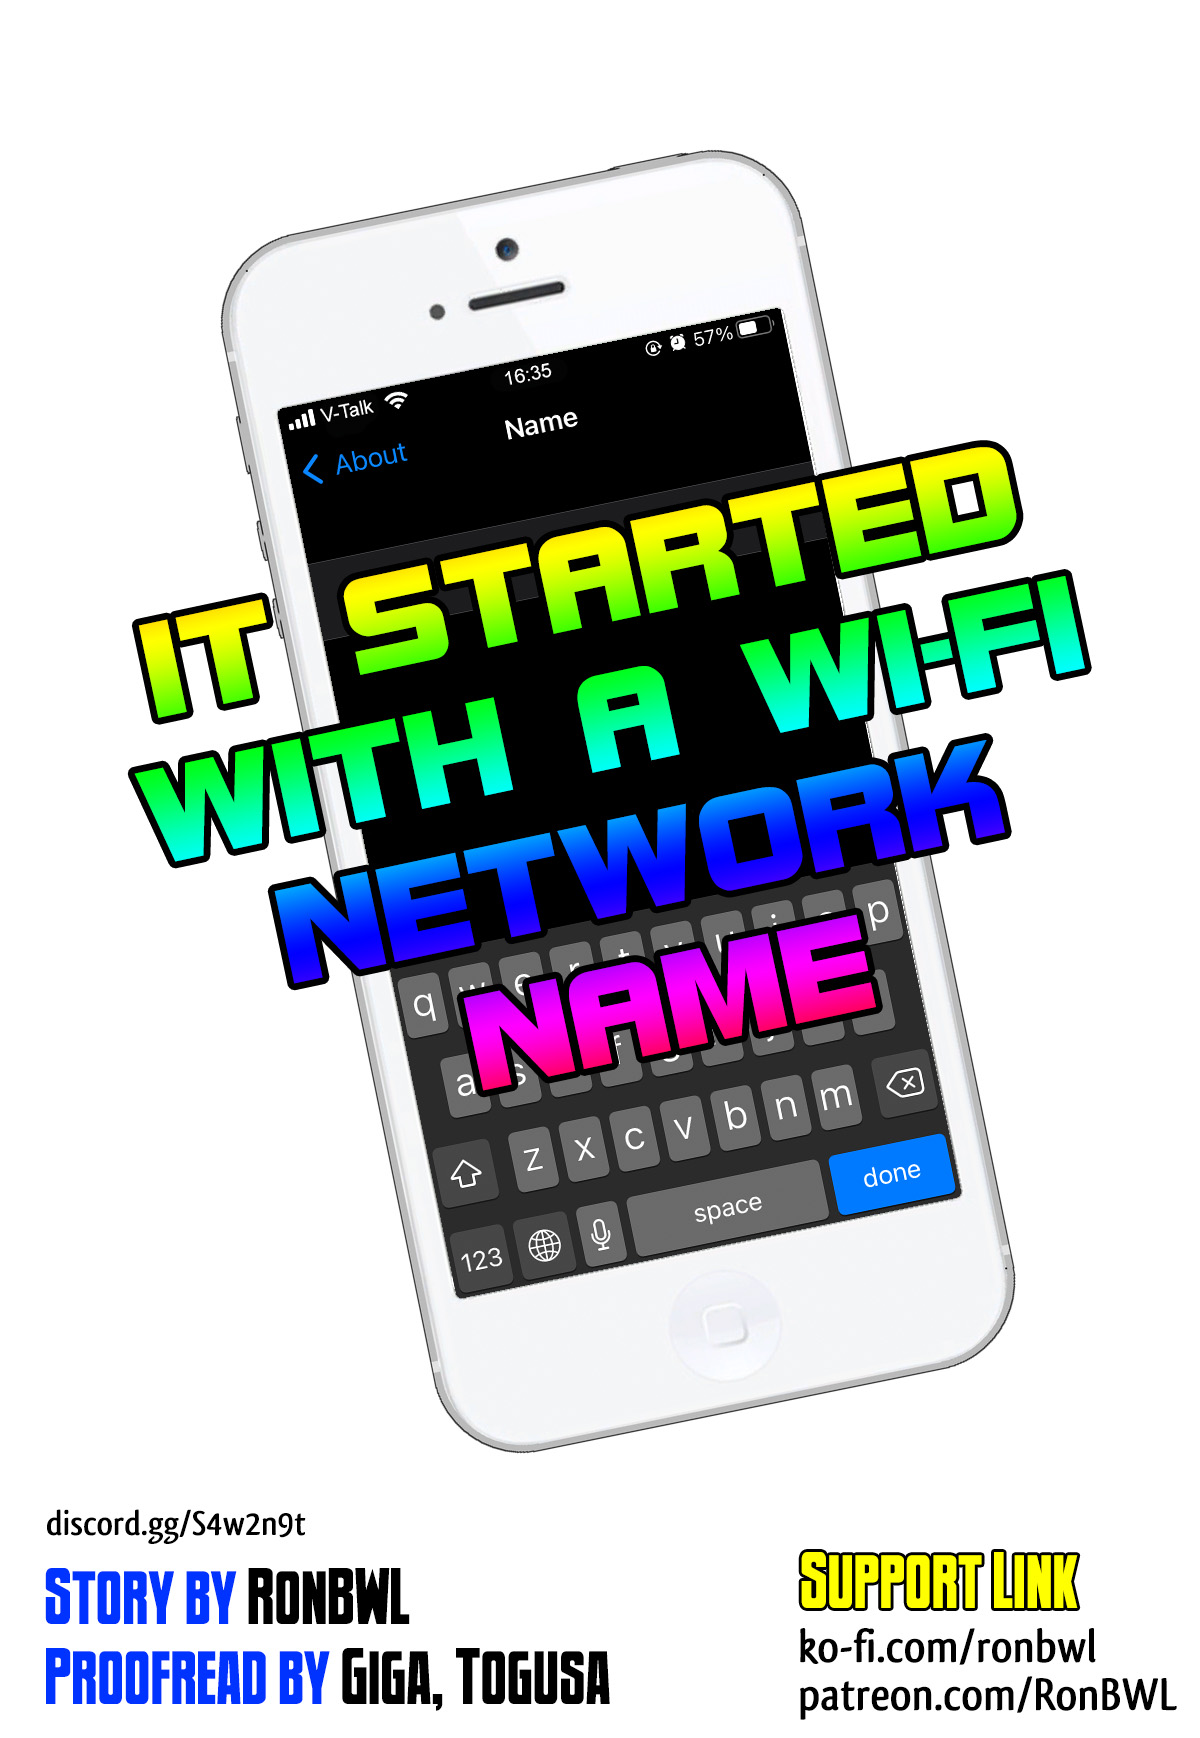 It started with a Wi-Fi network name 4